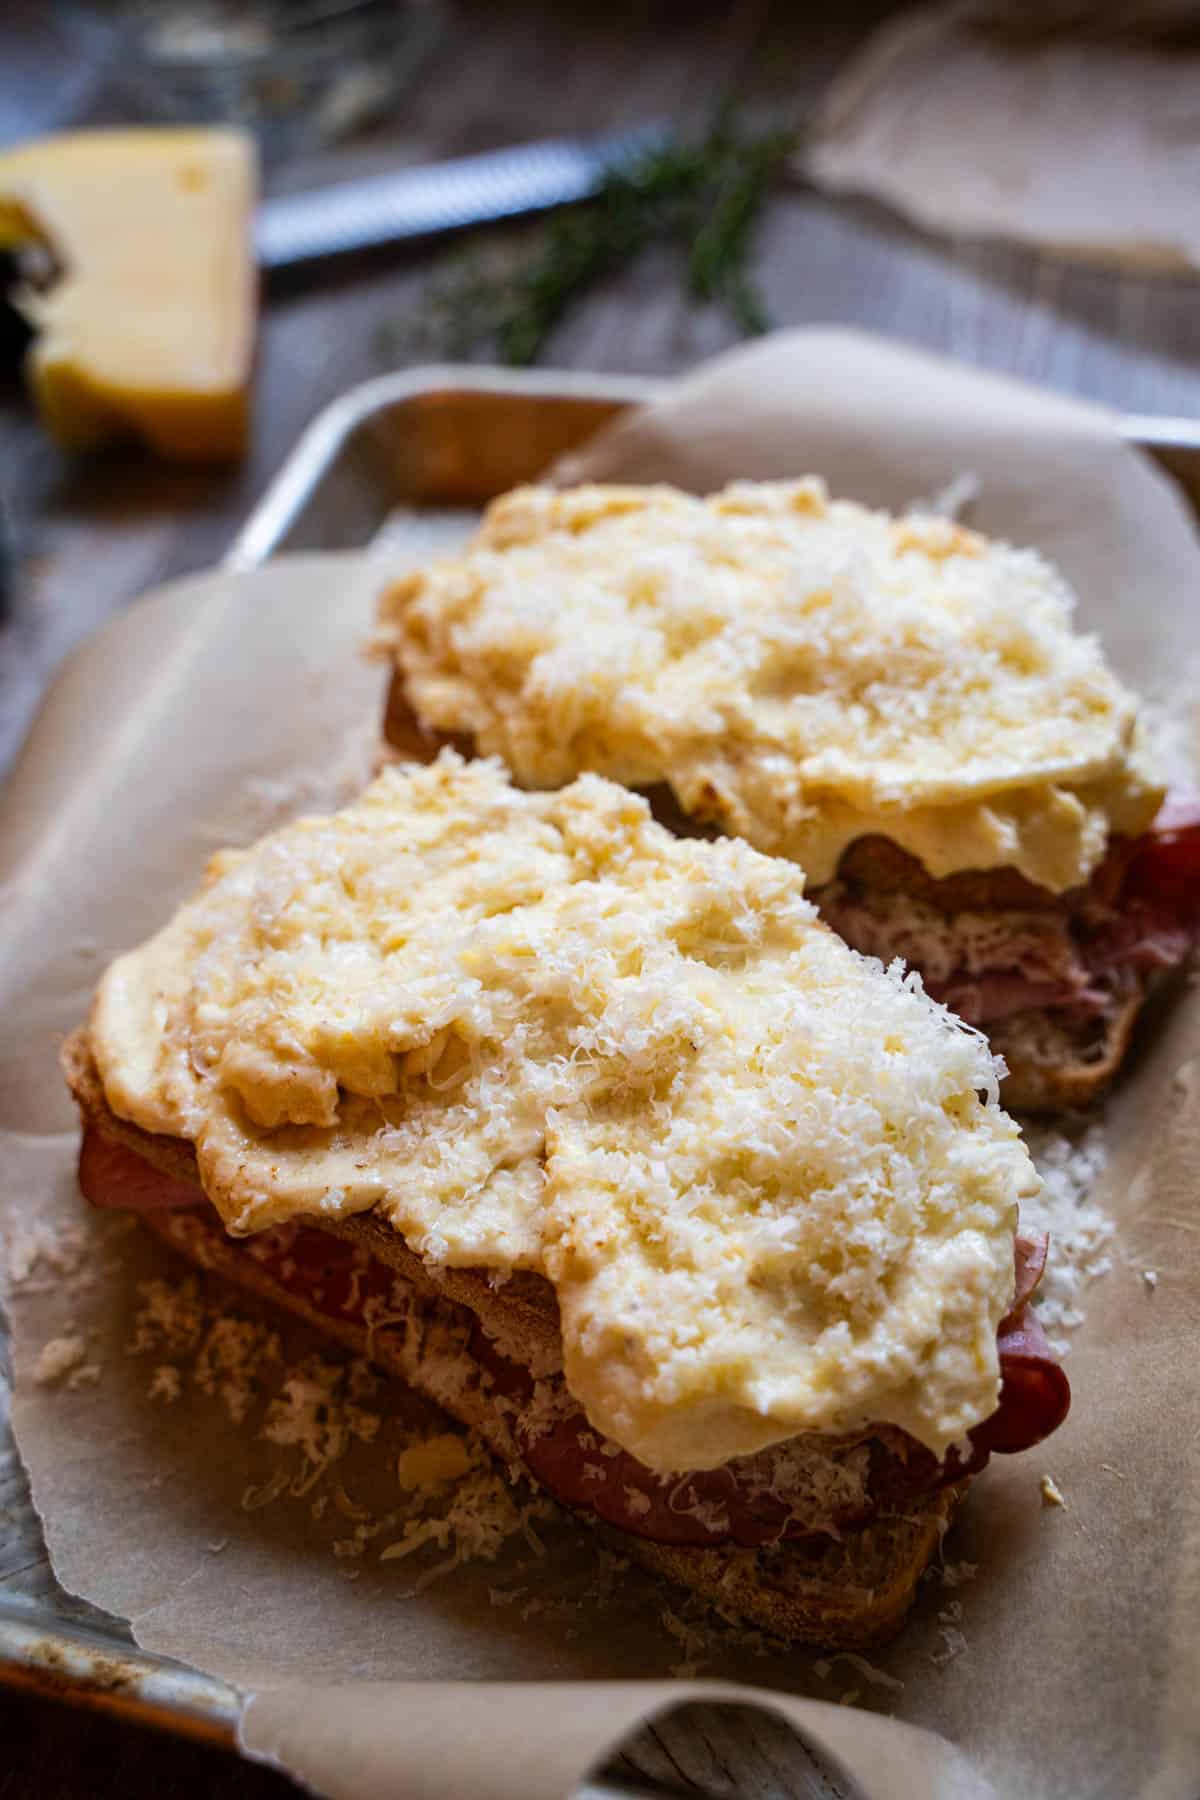 Croque monsieur Sandwiches on a baking sheet lined with parchment ready to bake in oven